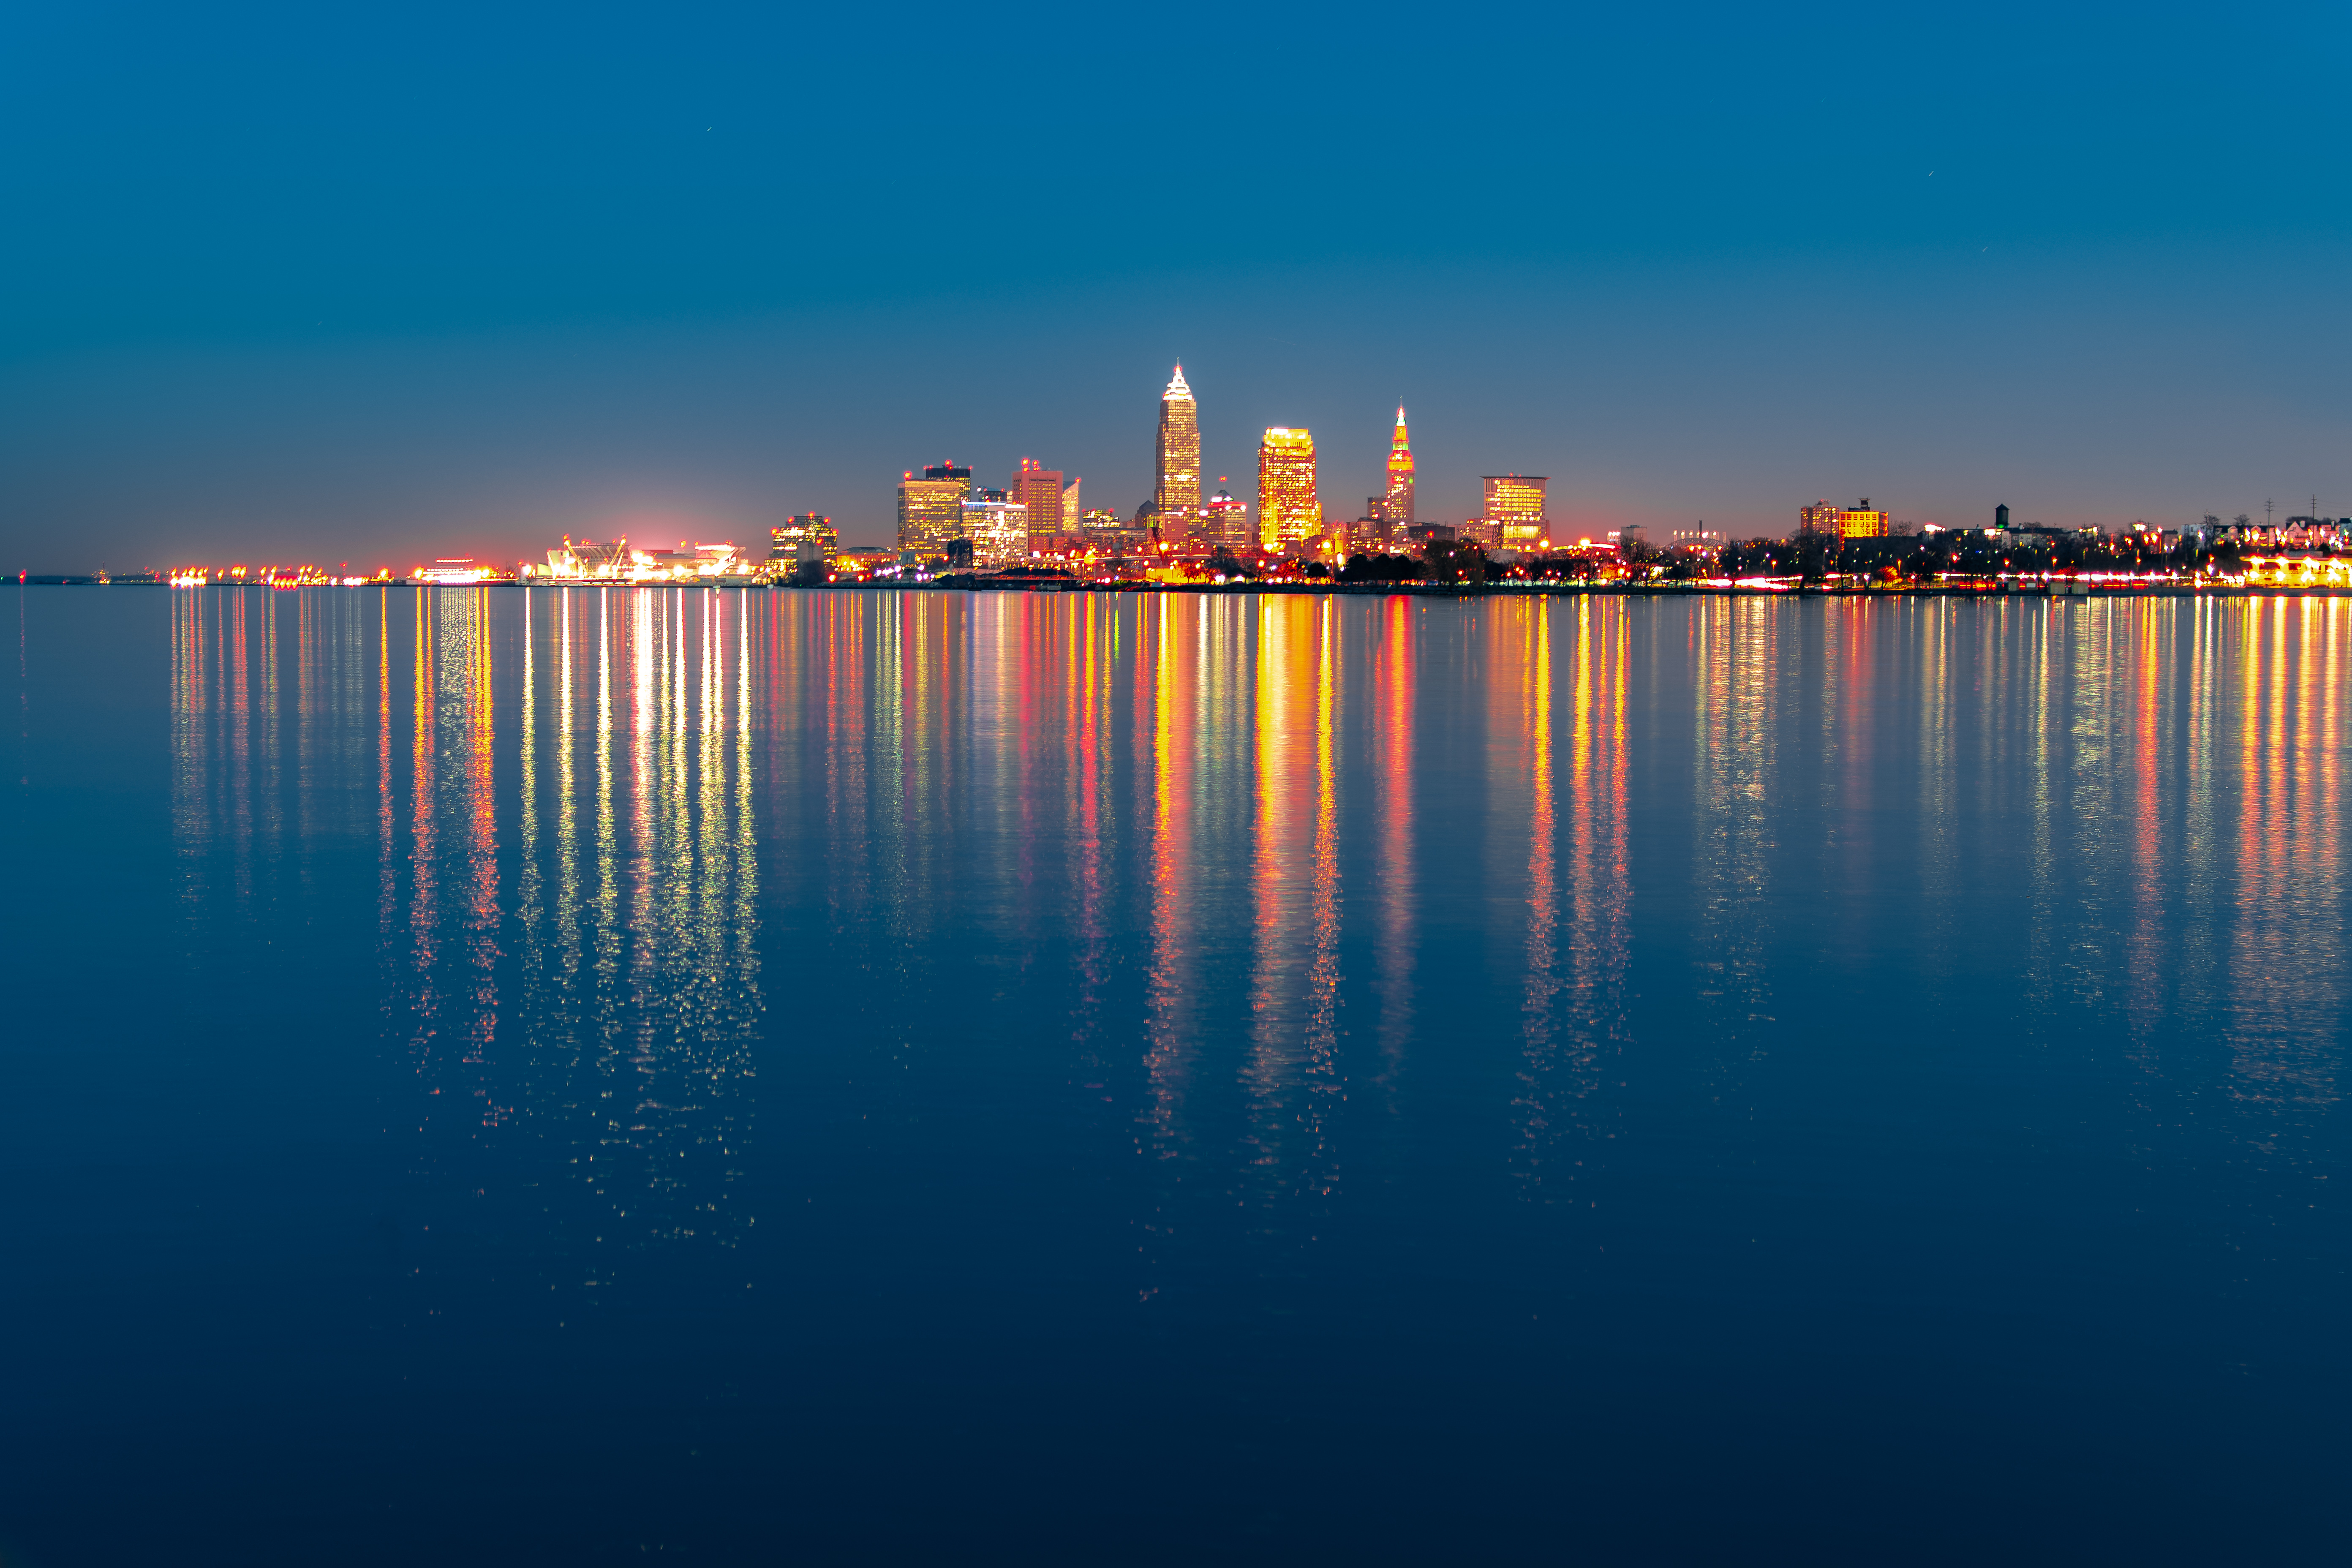 135302 download wallpaper cities, shore, bank, night city, city lights, panorama, ohio, cleveland screensavers and pictures for free